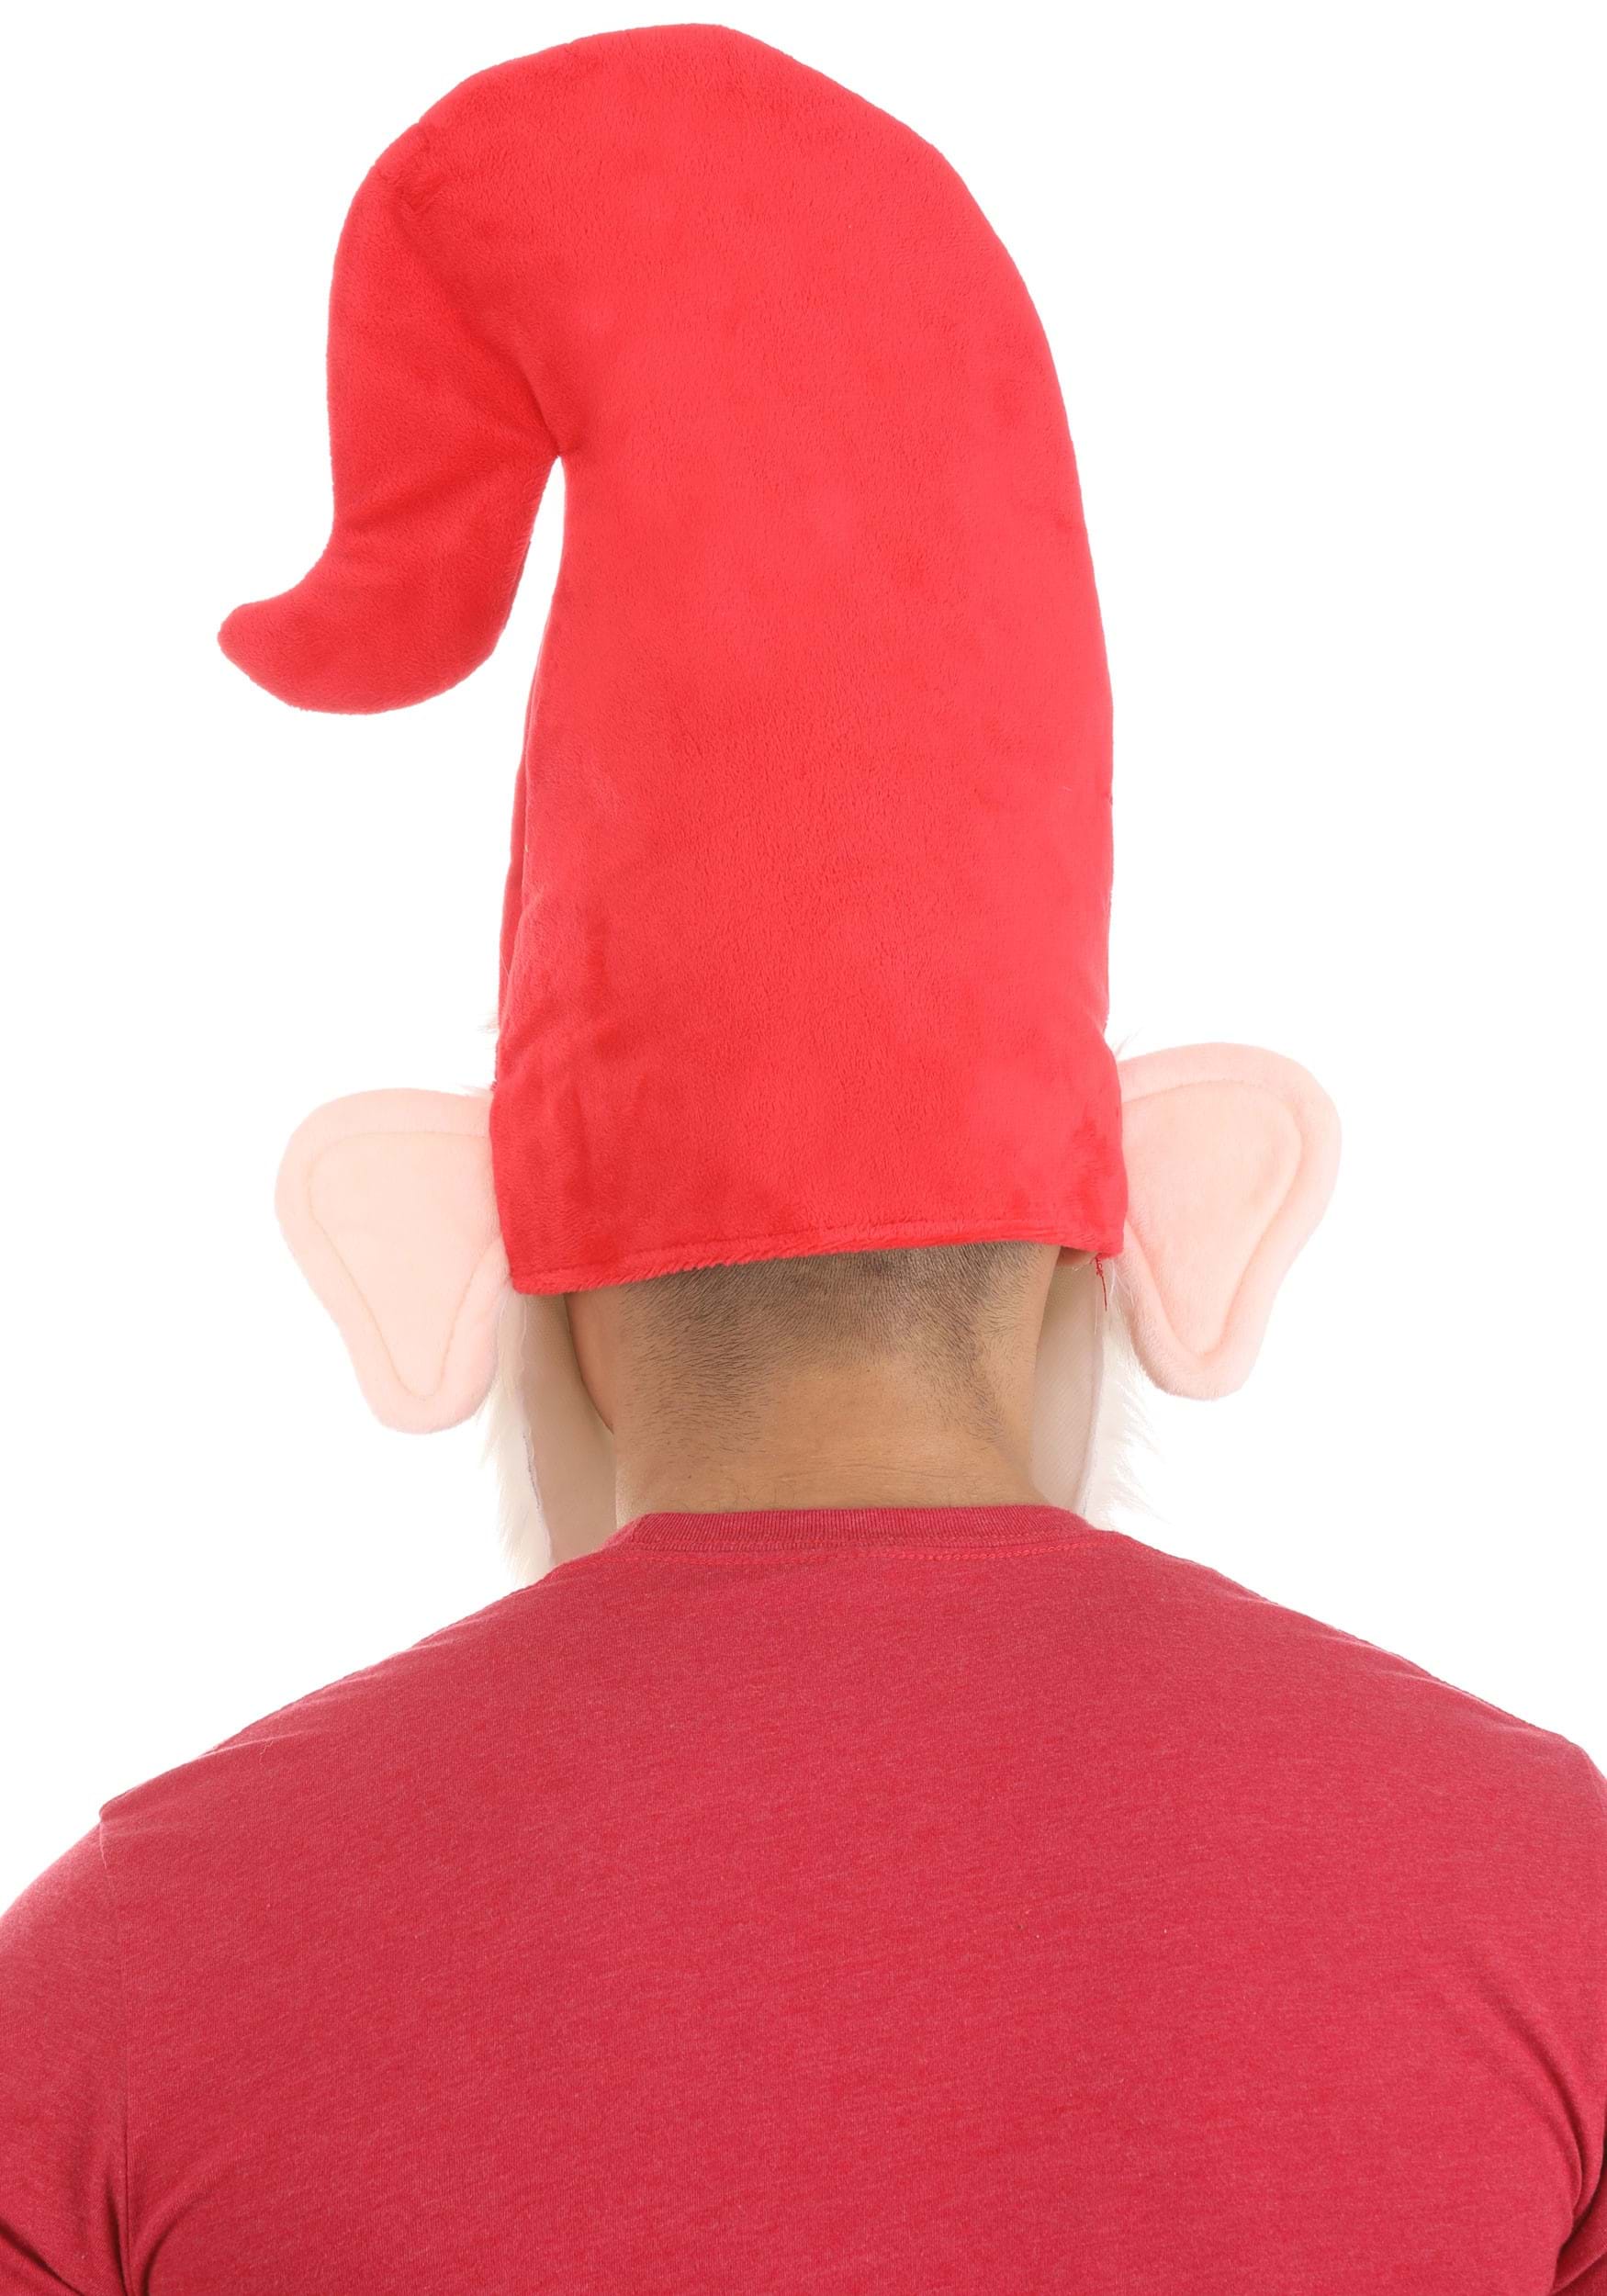 Oversized Red Gnome Hat With White Beard